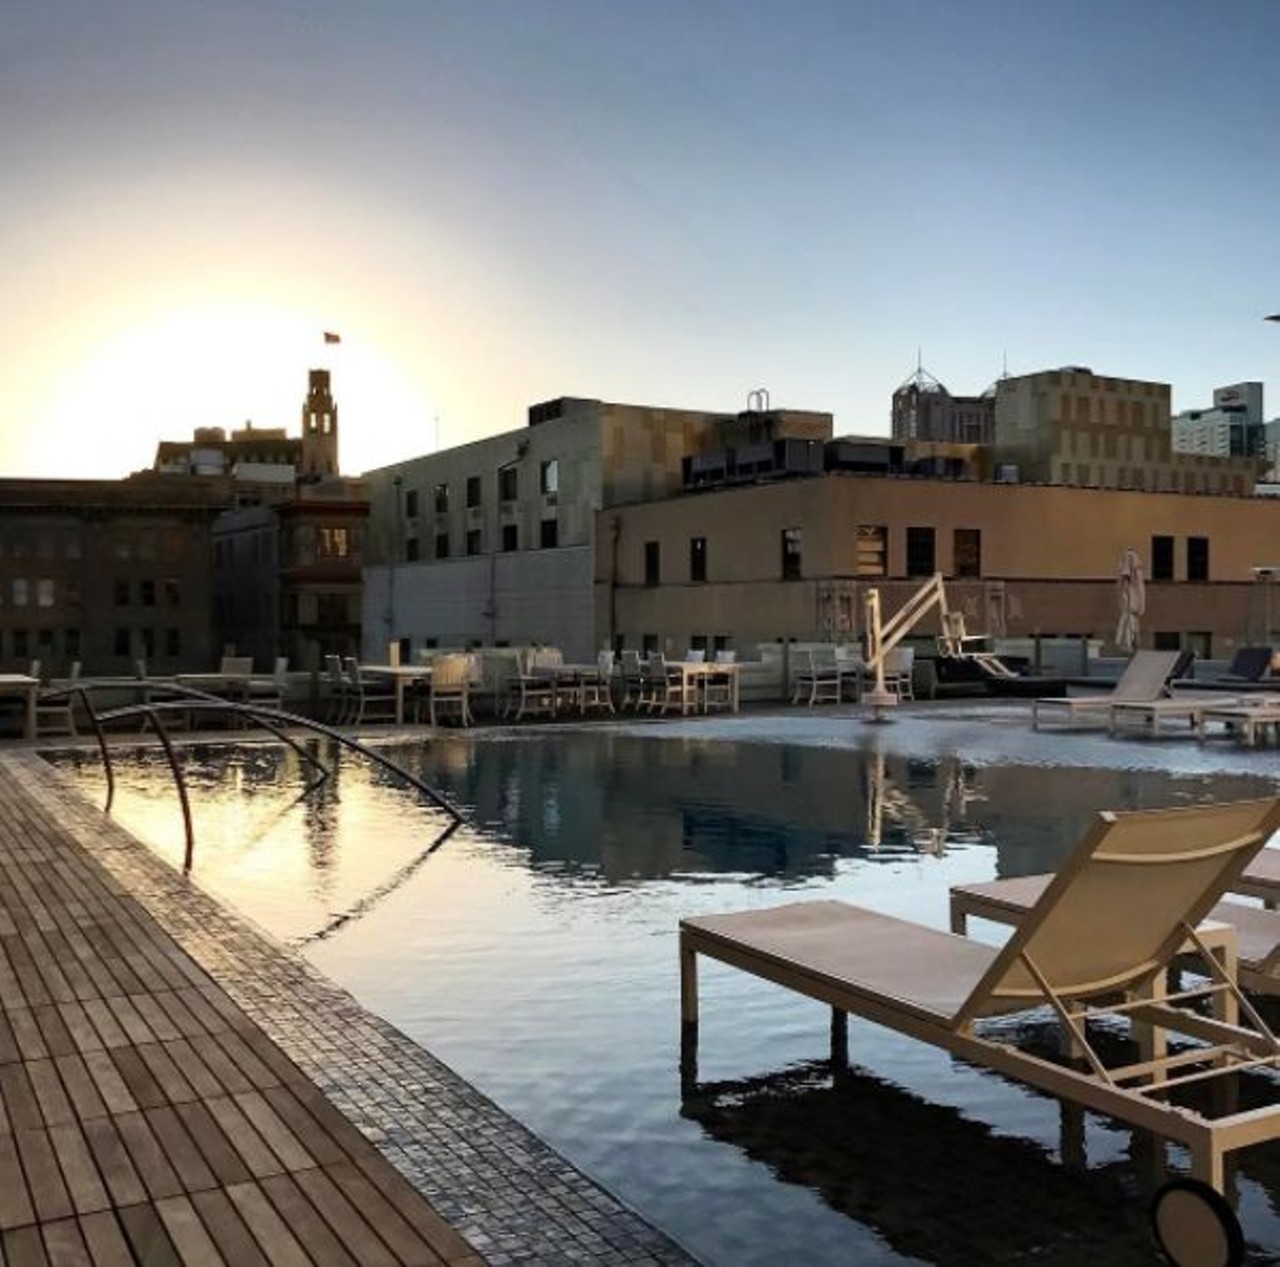 The St. Anthony Hotel
300 E. Travis St., (210) 227-4392, thestanthonyhotel.com
Take a dip in one of the most  luxurious roof-top pools in SA at the St. Anthony Hotel and blend in with the tourists. 
Photo via Instagram, chicmagnolia